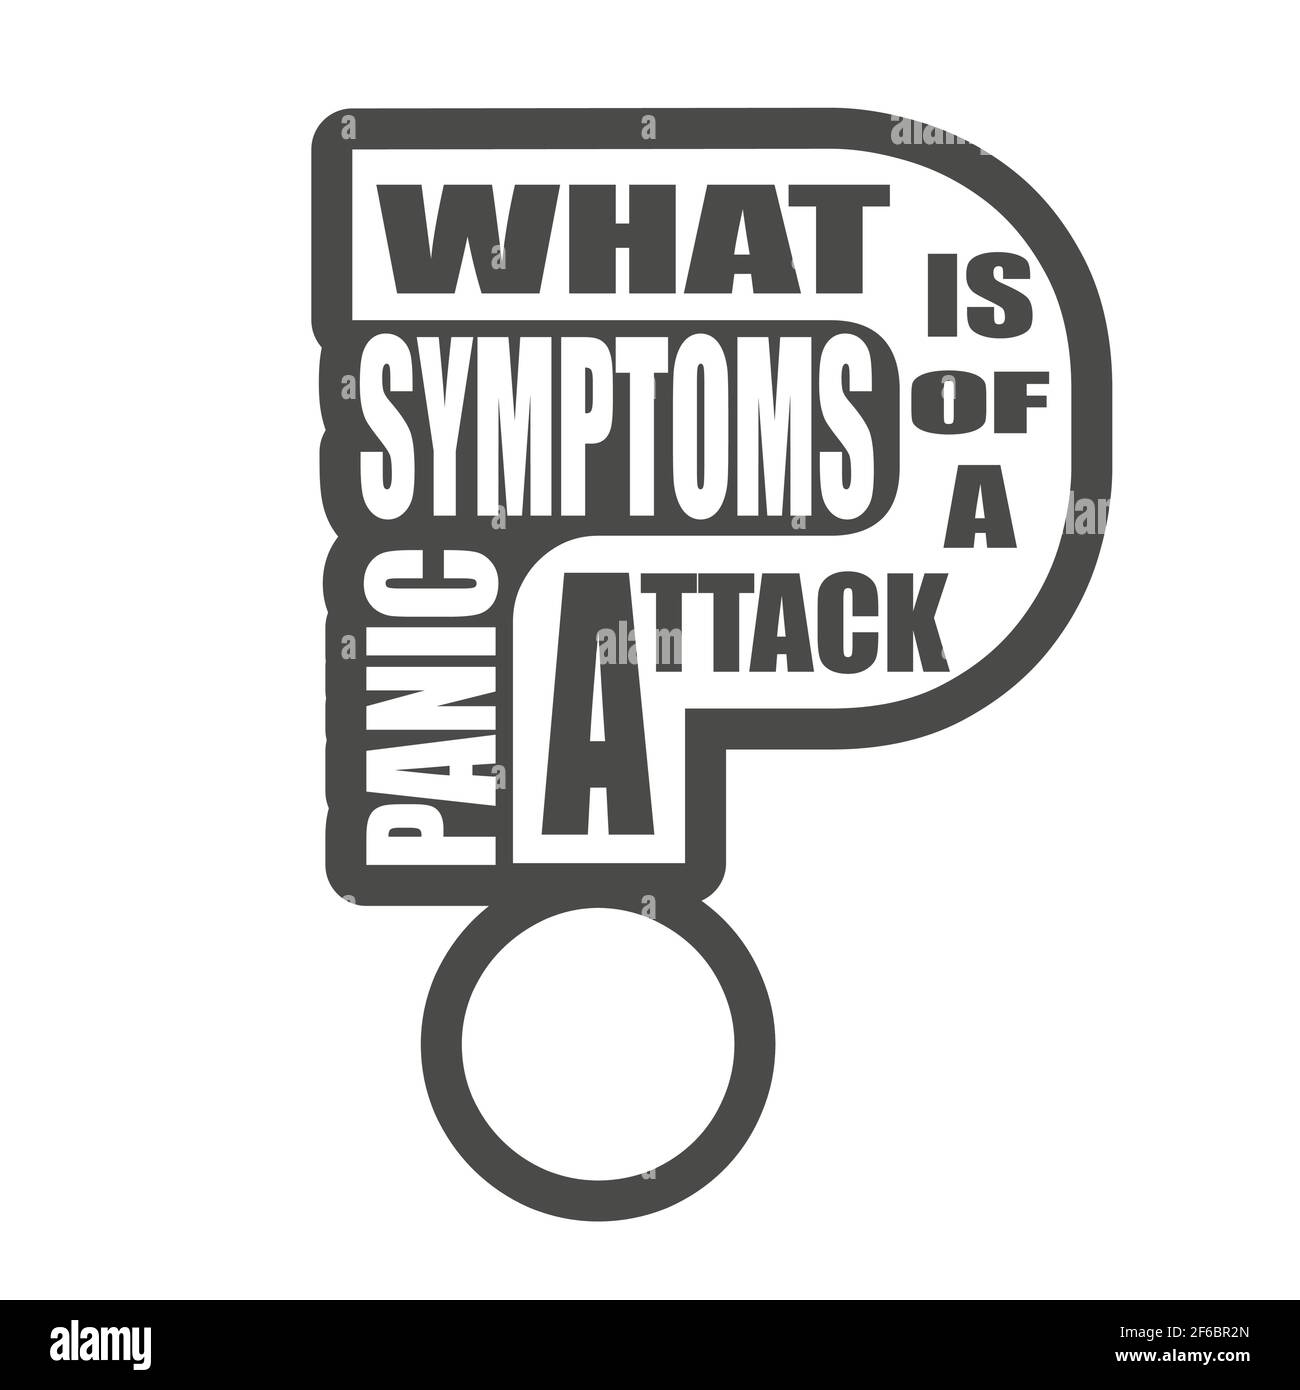 What is symptoms of panic attack question. Medical education relative illustration. Scientific medical design Stock Vector